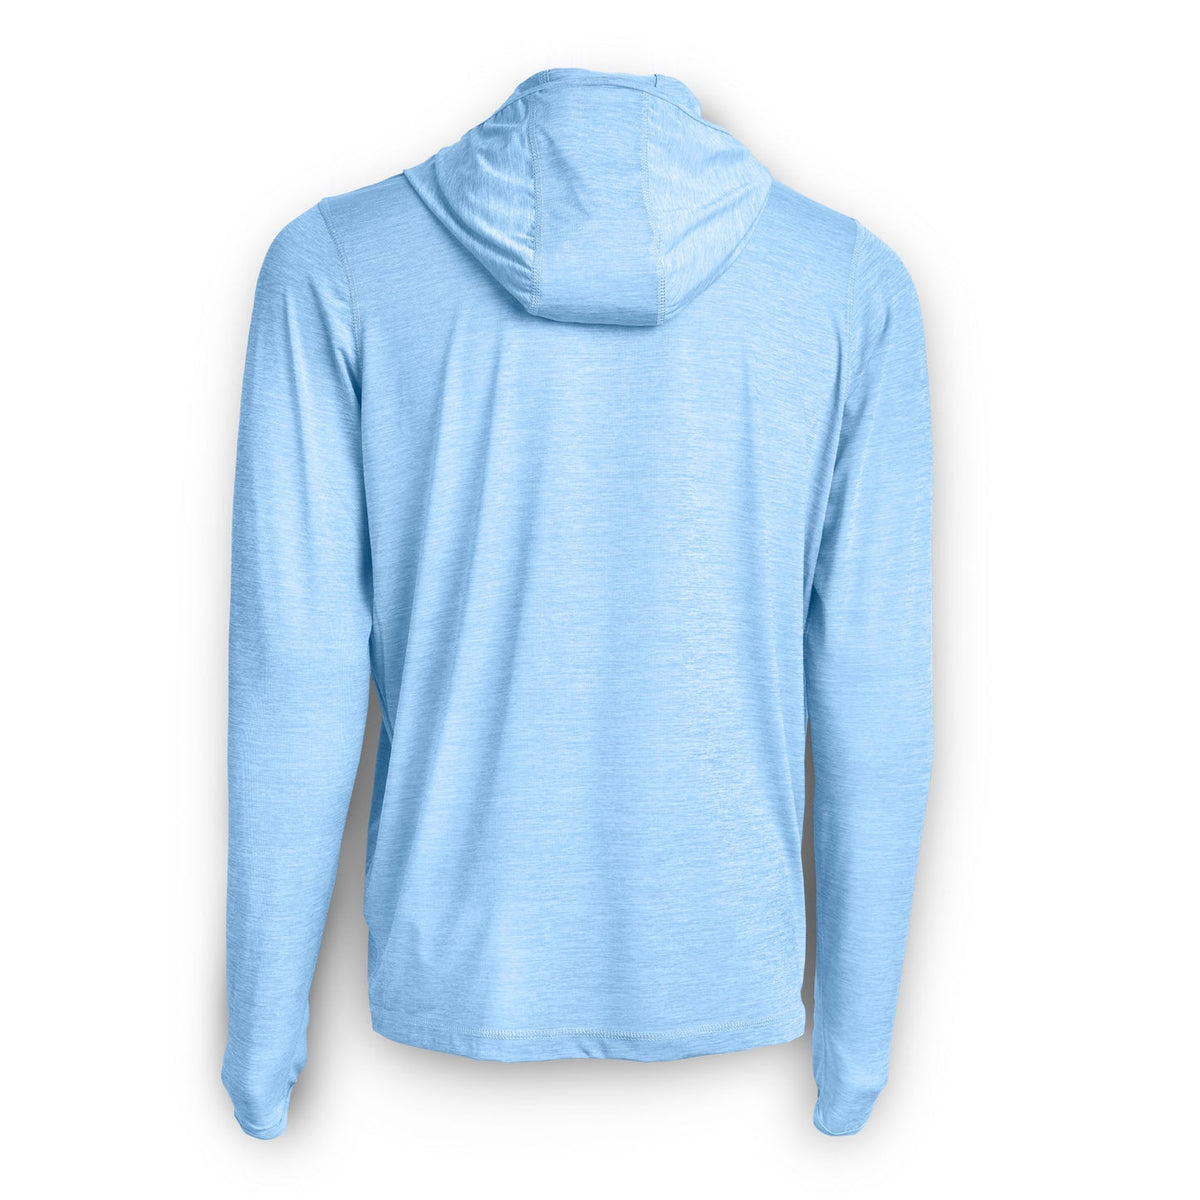 SCALES Iconic Hooded Long Sleeve Active Performance